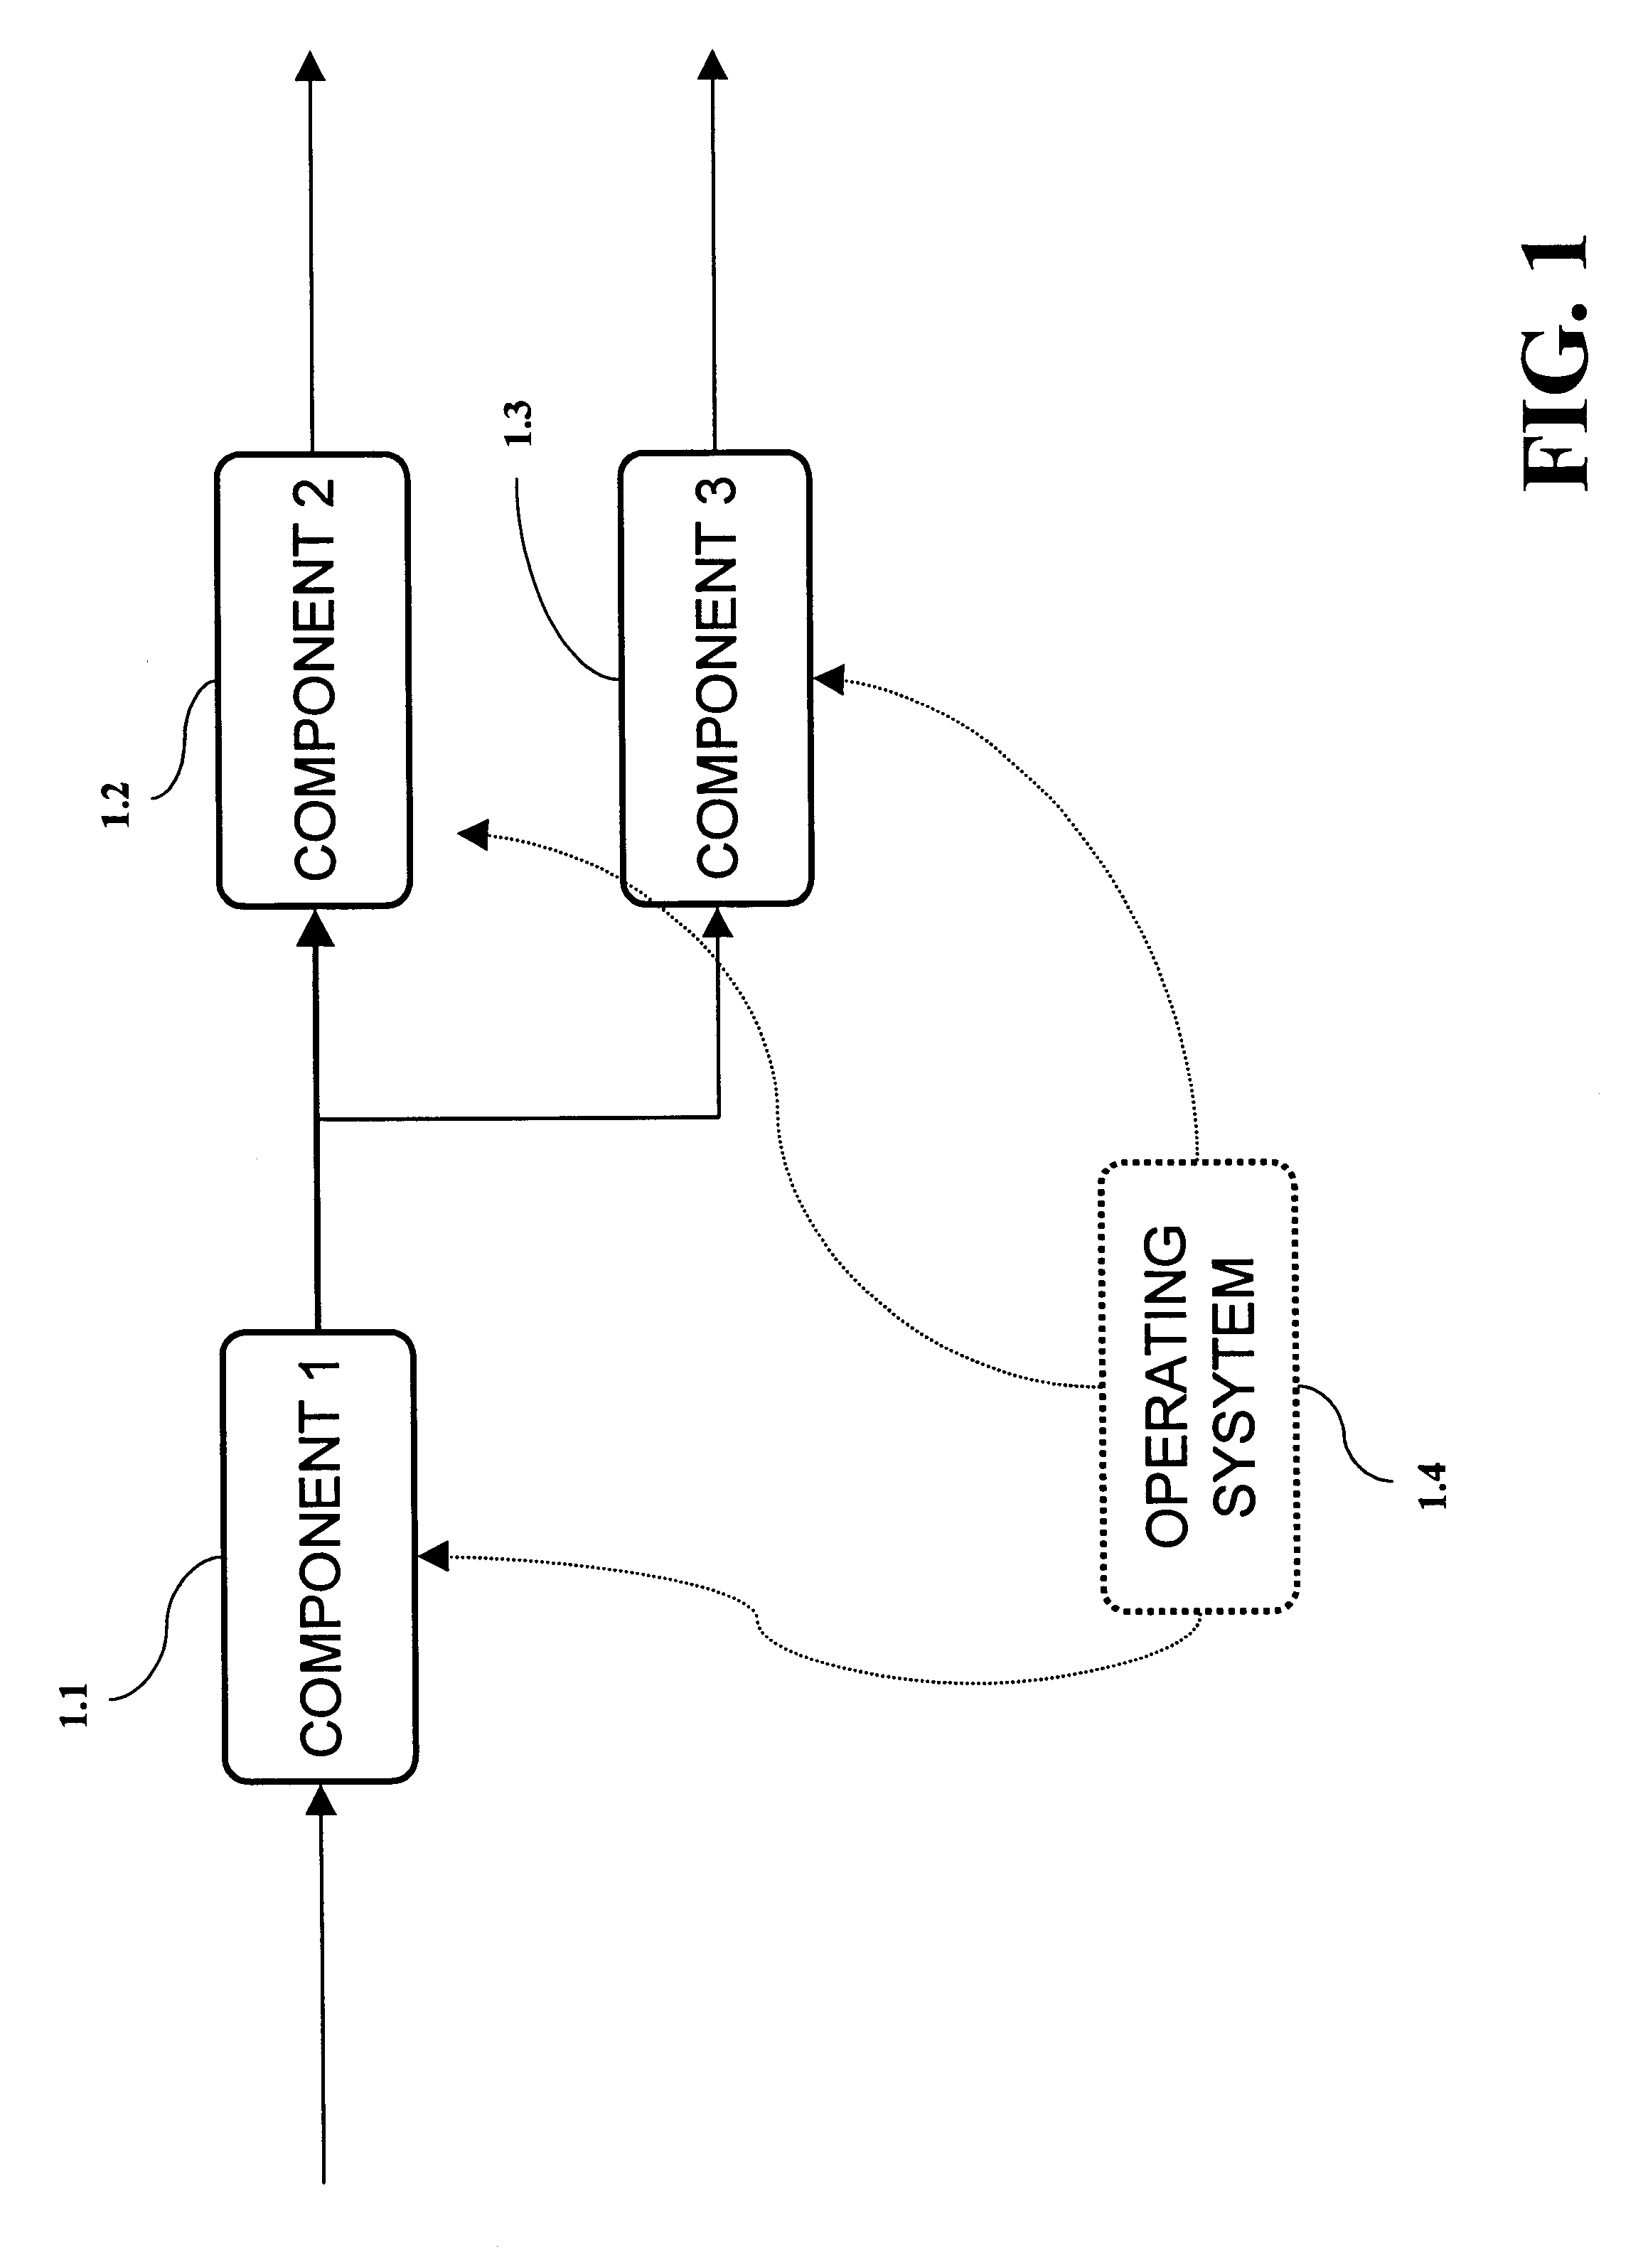 System and method for developing reusable flexible and platform independent software using components